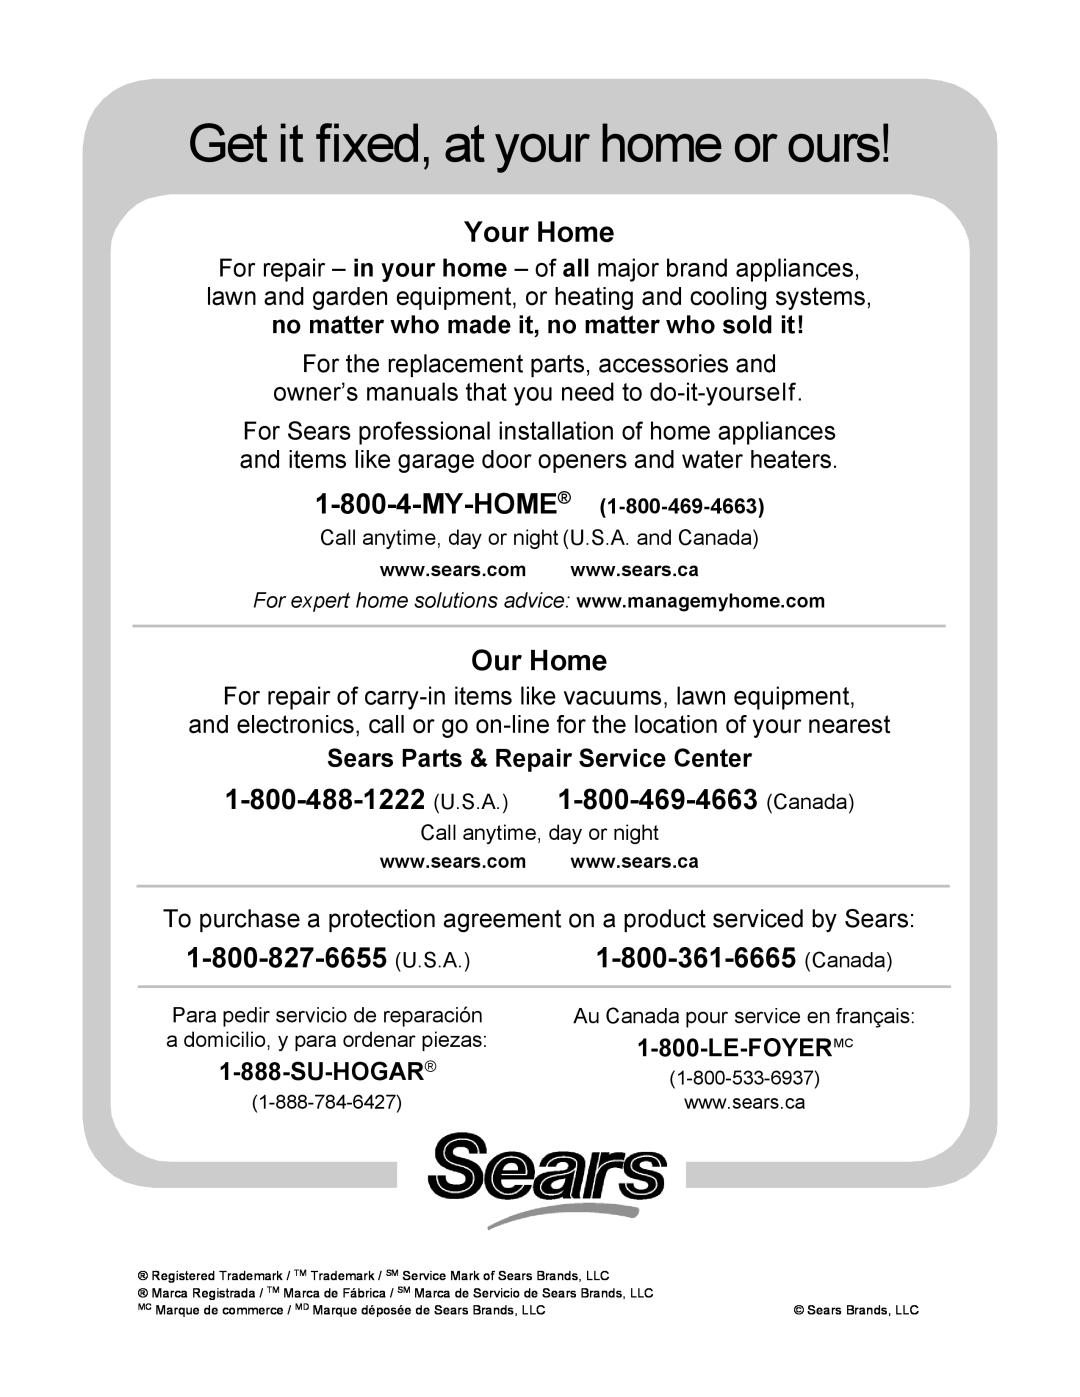 Sears 247.8879 Sears Parts & Repair Service Center, Su-Hogar, Le-Foyermc, Get it fixed, at your home or ours, Your Home 